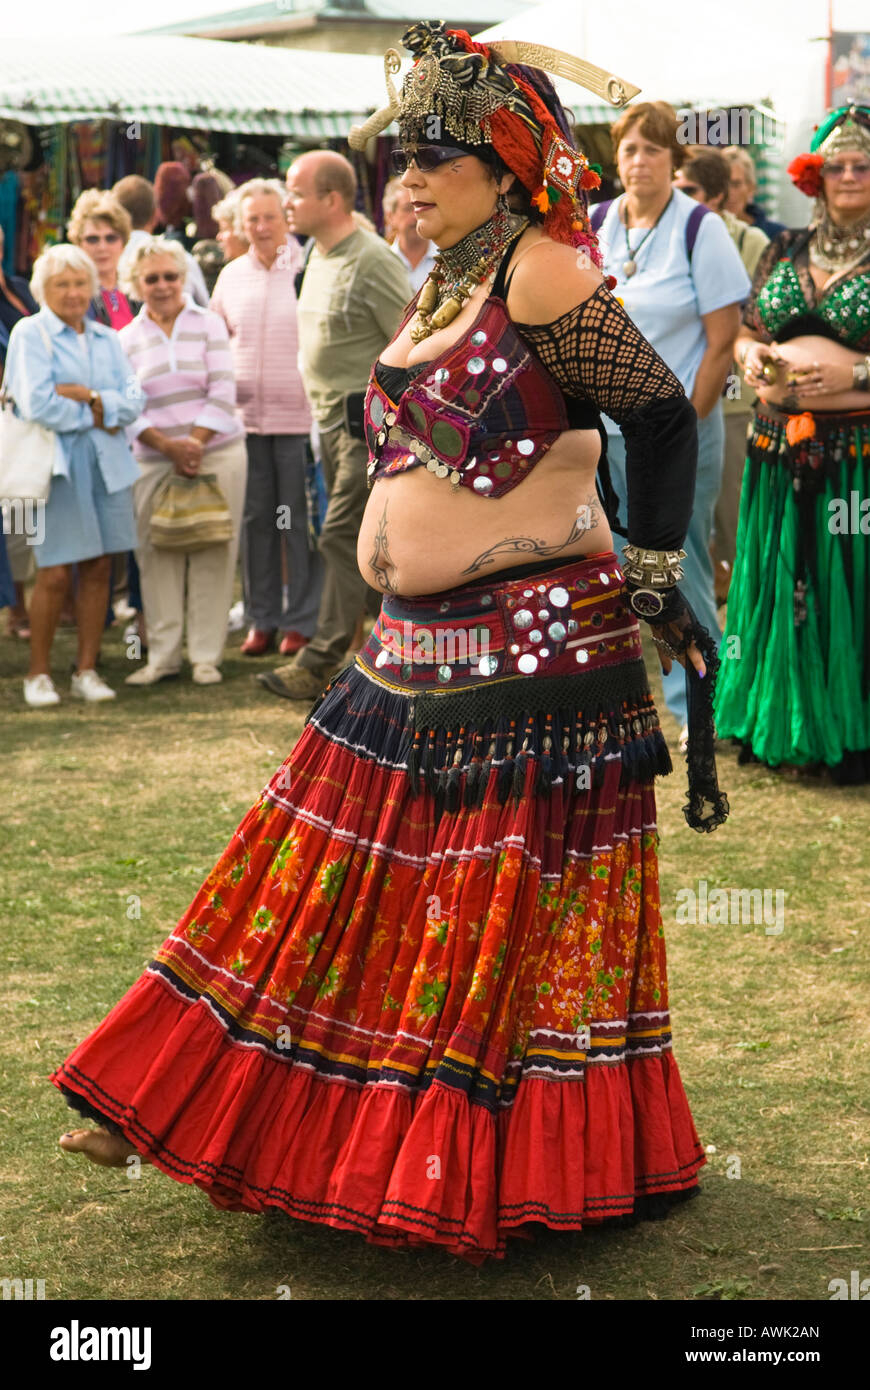 Swanage Folk Festival, fat flamboyant belly dancer, spectacular dress, troupe performing in show grounds, September,Swanage, Dorset, UK, Stock Photo